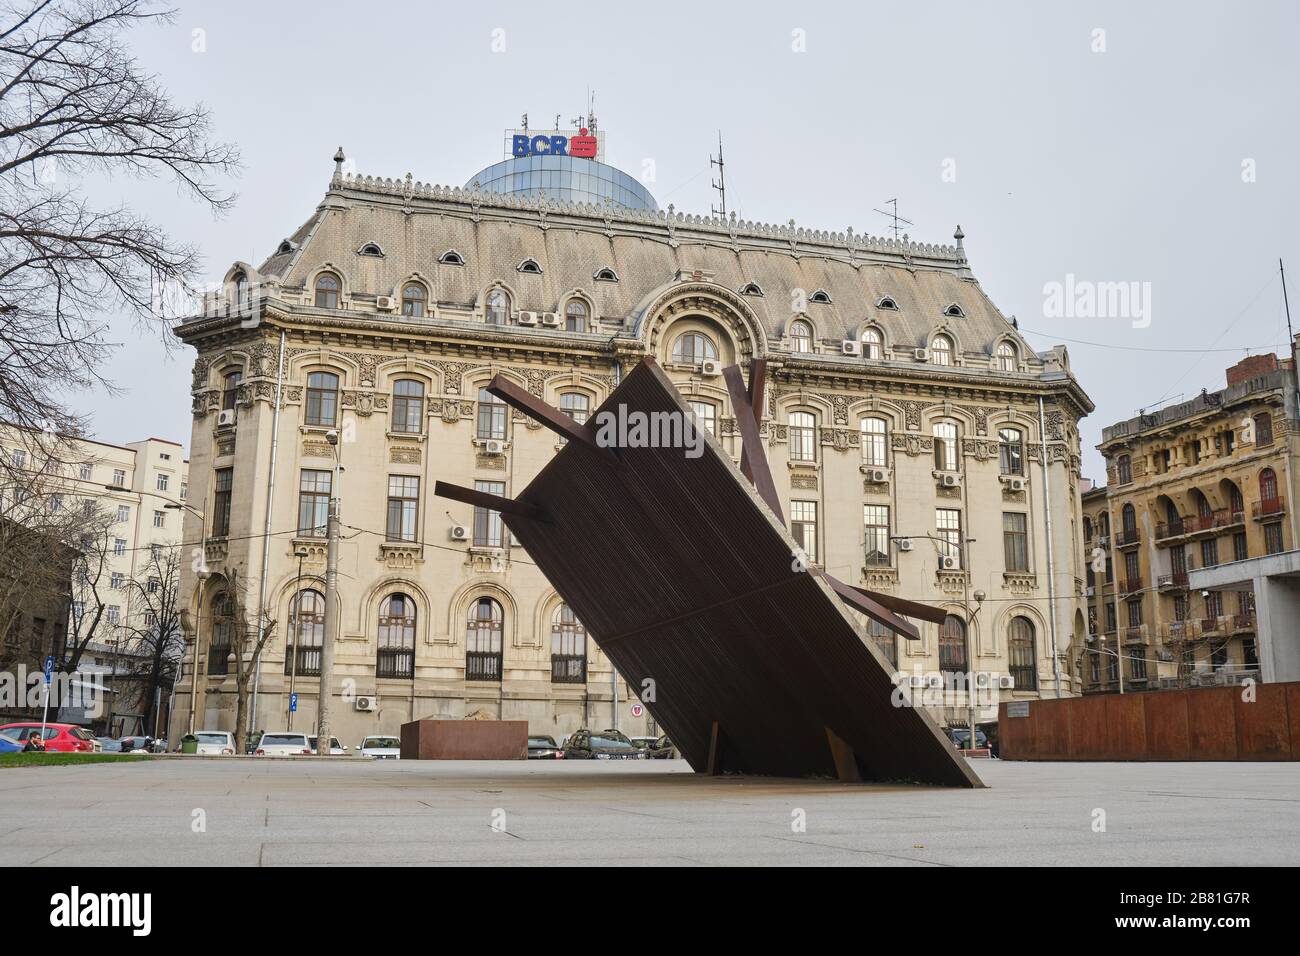 Bucharest, Romania - March 4, 2020: Holocaust Memorial dedicated to the hundreds of thousands of Romanian Jews, victims of the Holocaust in Romania be Stock Photo